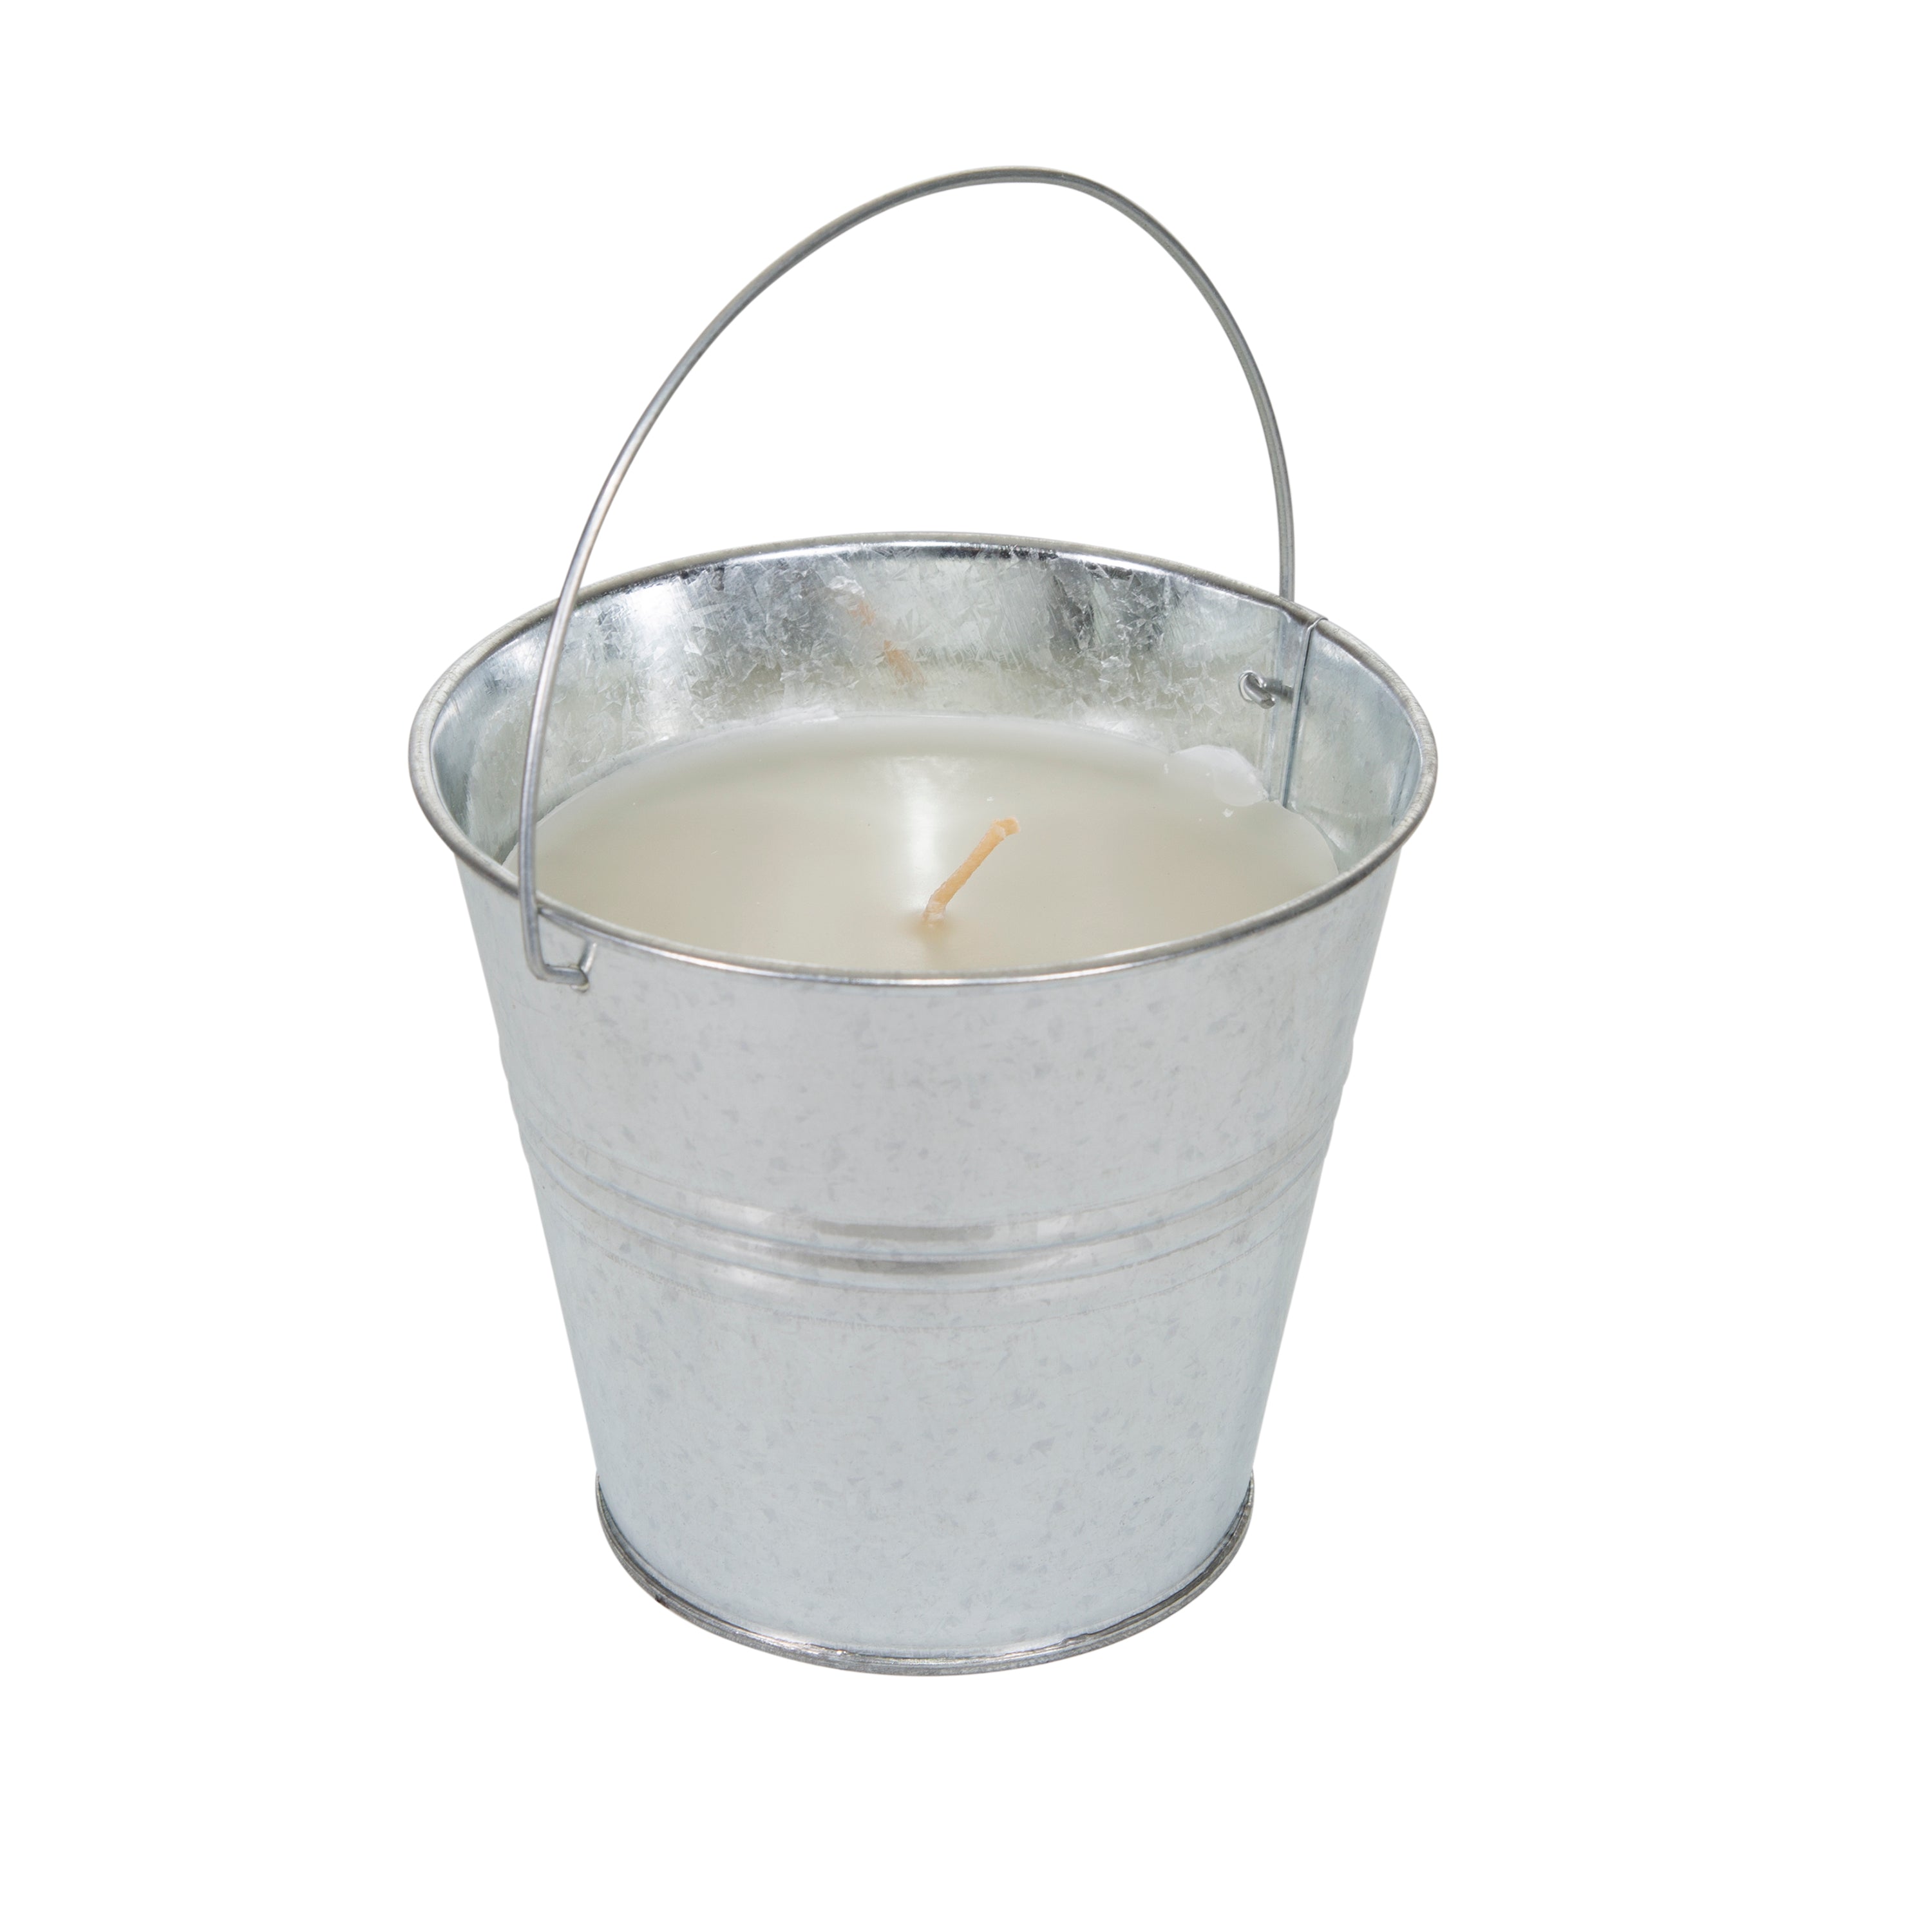 Citronella Bug Repellant Candle - Large-eSafety Supplies, Inc